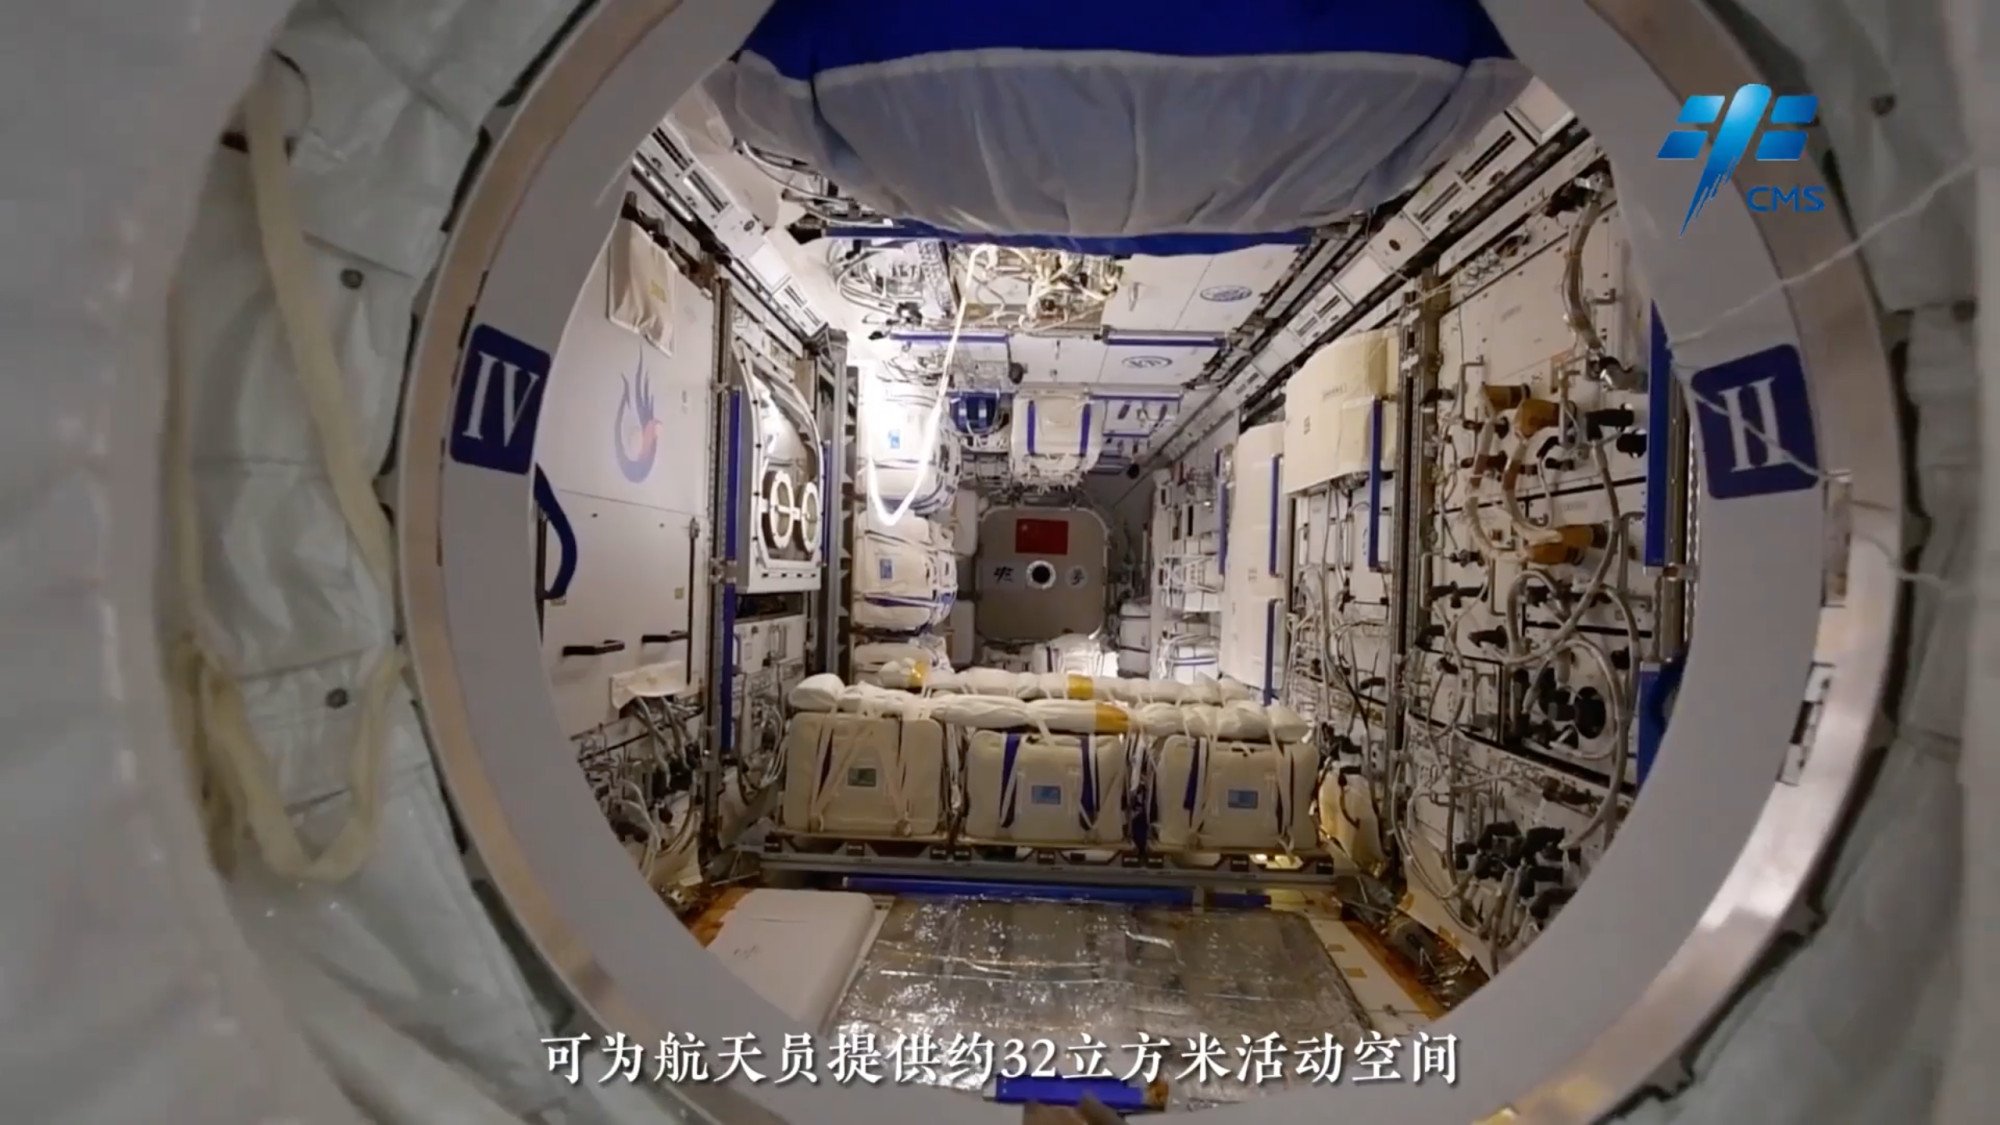 The interior of Mengtian experimental module. Mengtian is equipped with more research facilities than the Wentian module and will support a range of physics experiments under microgravity. Photo: Handout